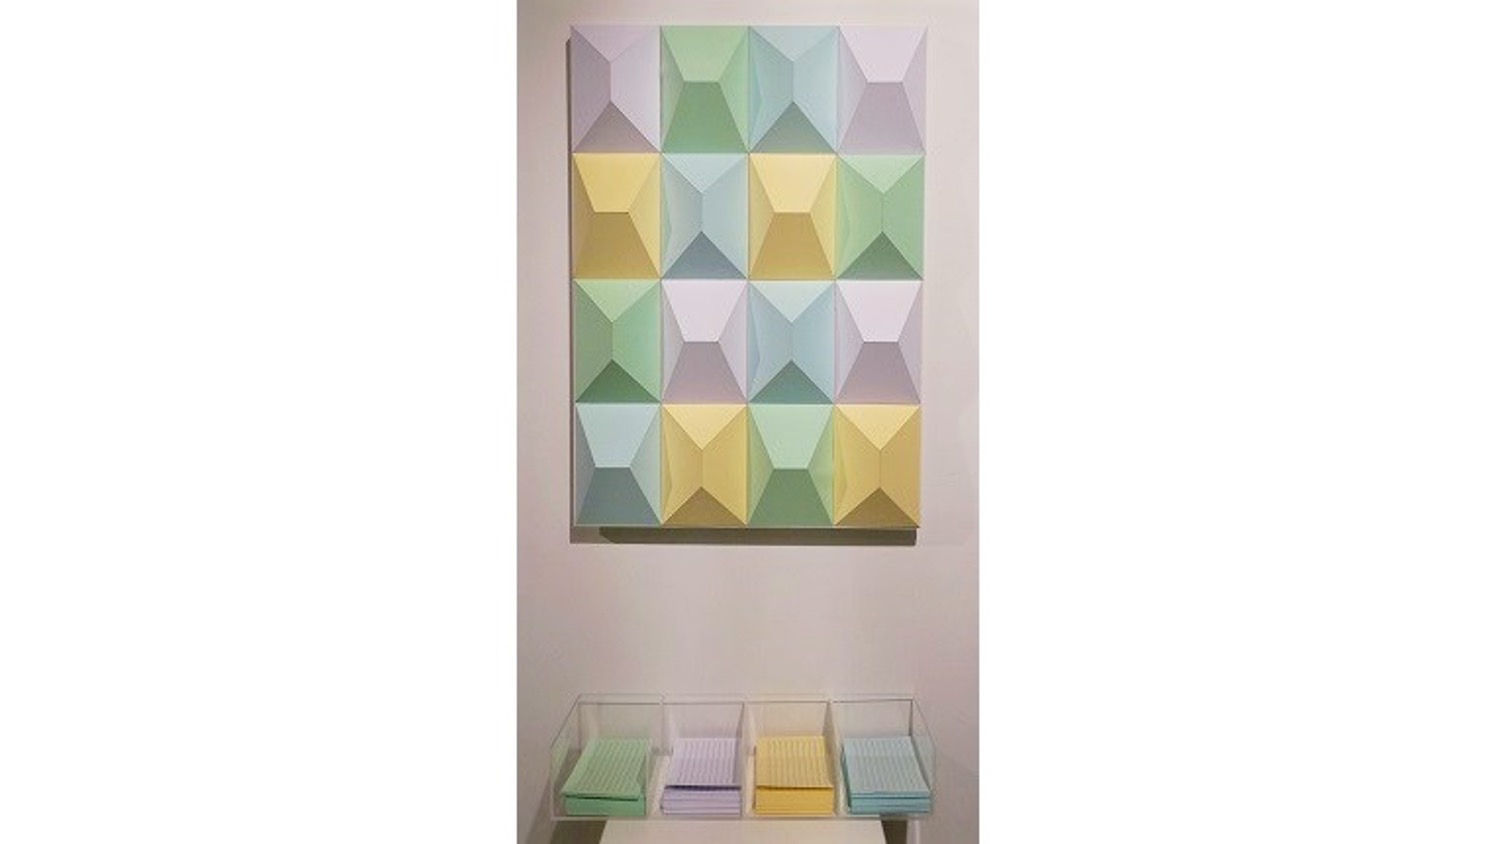 Gabriel Acevedo Velarde. "Art Piece Nº 7", 2011. Three-dimensional work made of paper. Methacrylate and paper/color charts. 72 x 42 x 16 cm.